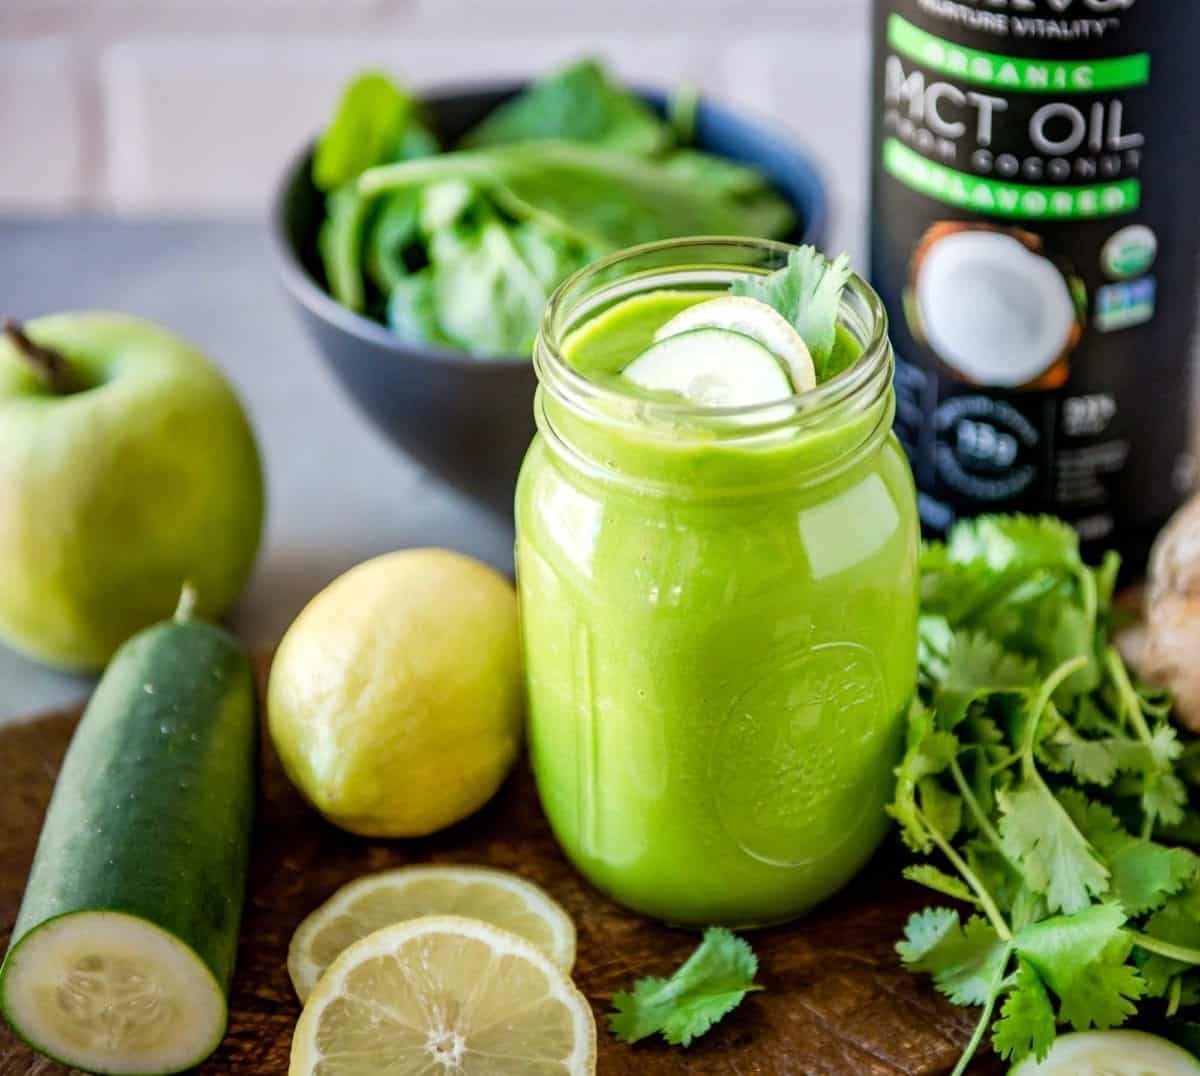 green smoothie in a glass jar next to green ingredients and a bottle of mct oil.